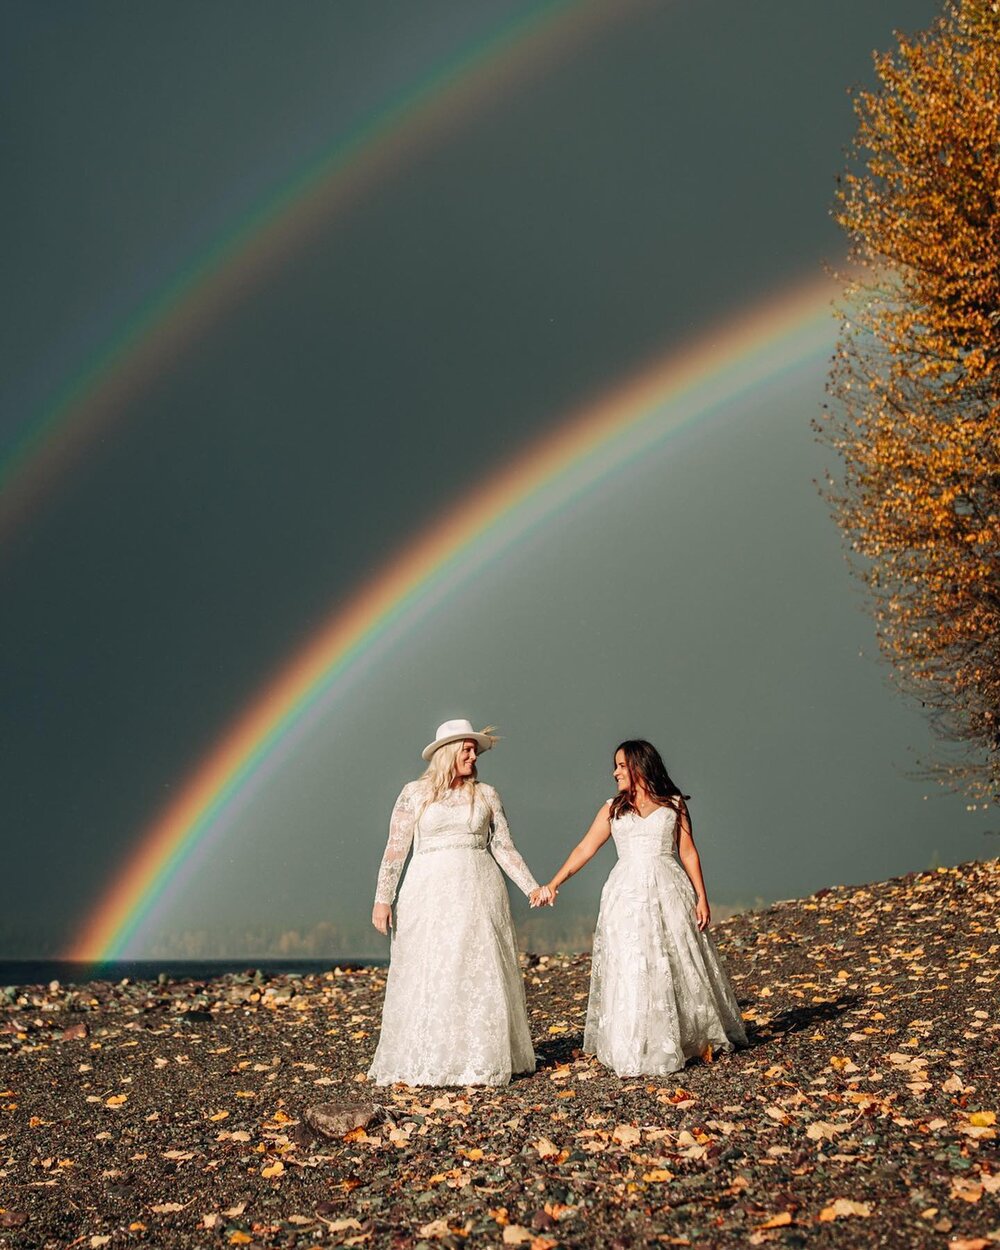 Stephanie and Maria had an absolutely epic and eventful Lake McDonald ceremony 🌈 Nature put on a full celebration of their love! 

Follow the link in our bio to read the story! 

Photographer: @jennifervernarskyphotography 
Celebrant: @lichenandpine